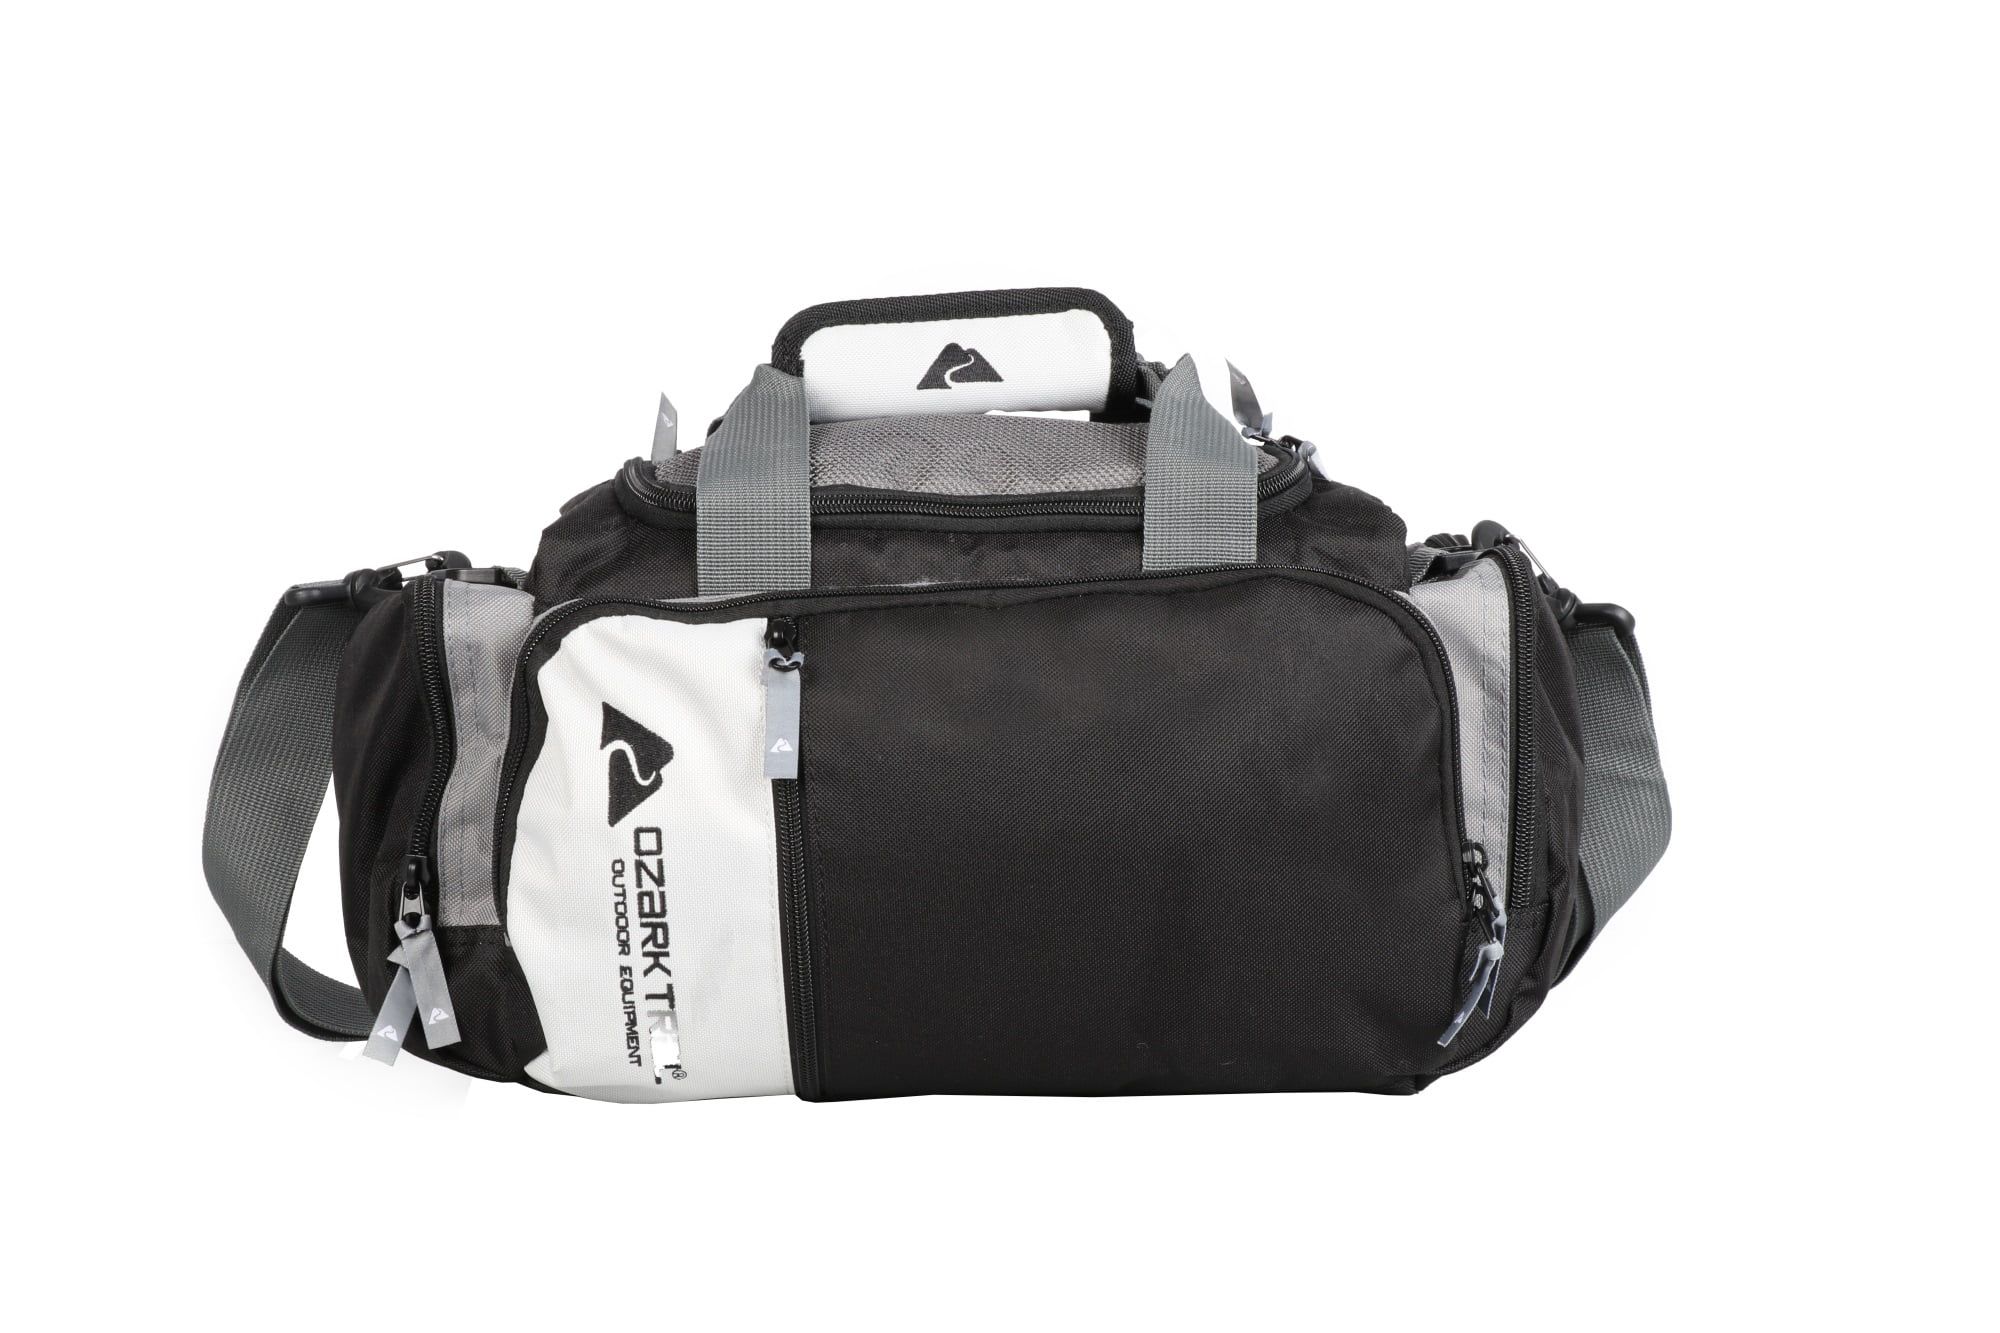 Ozark Trail Gear Duffel Bag with Padded Handle, Solid Black and Silver | Walmart (US)